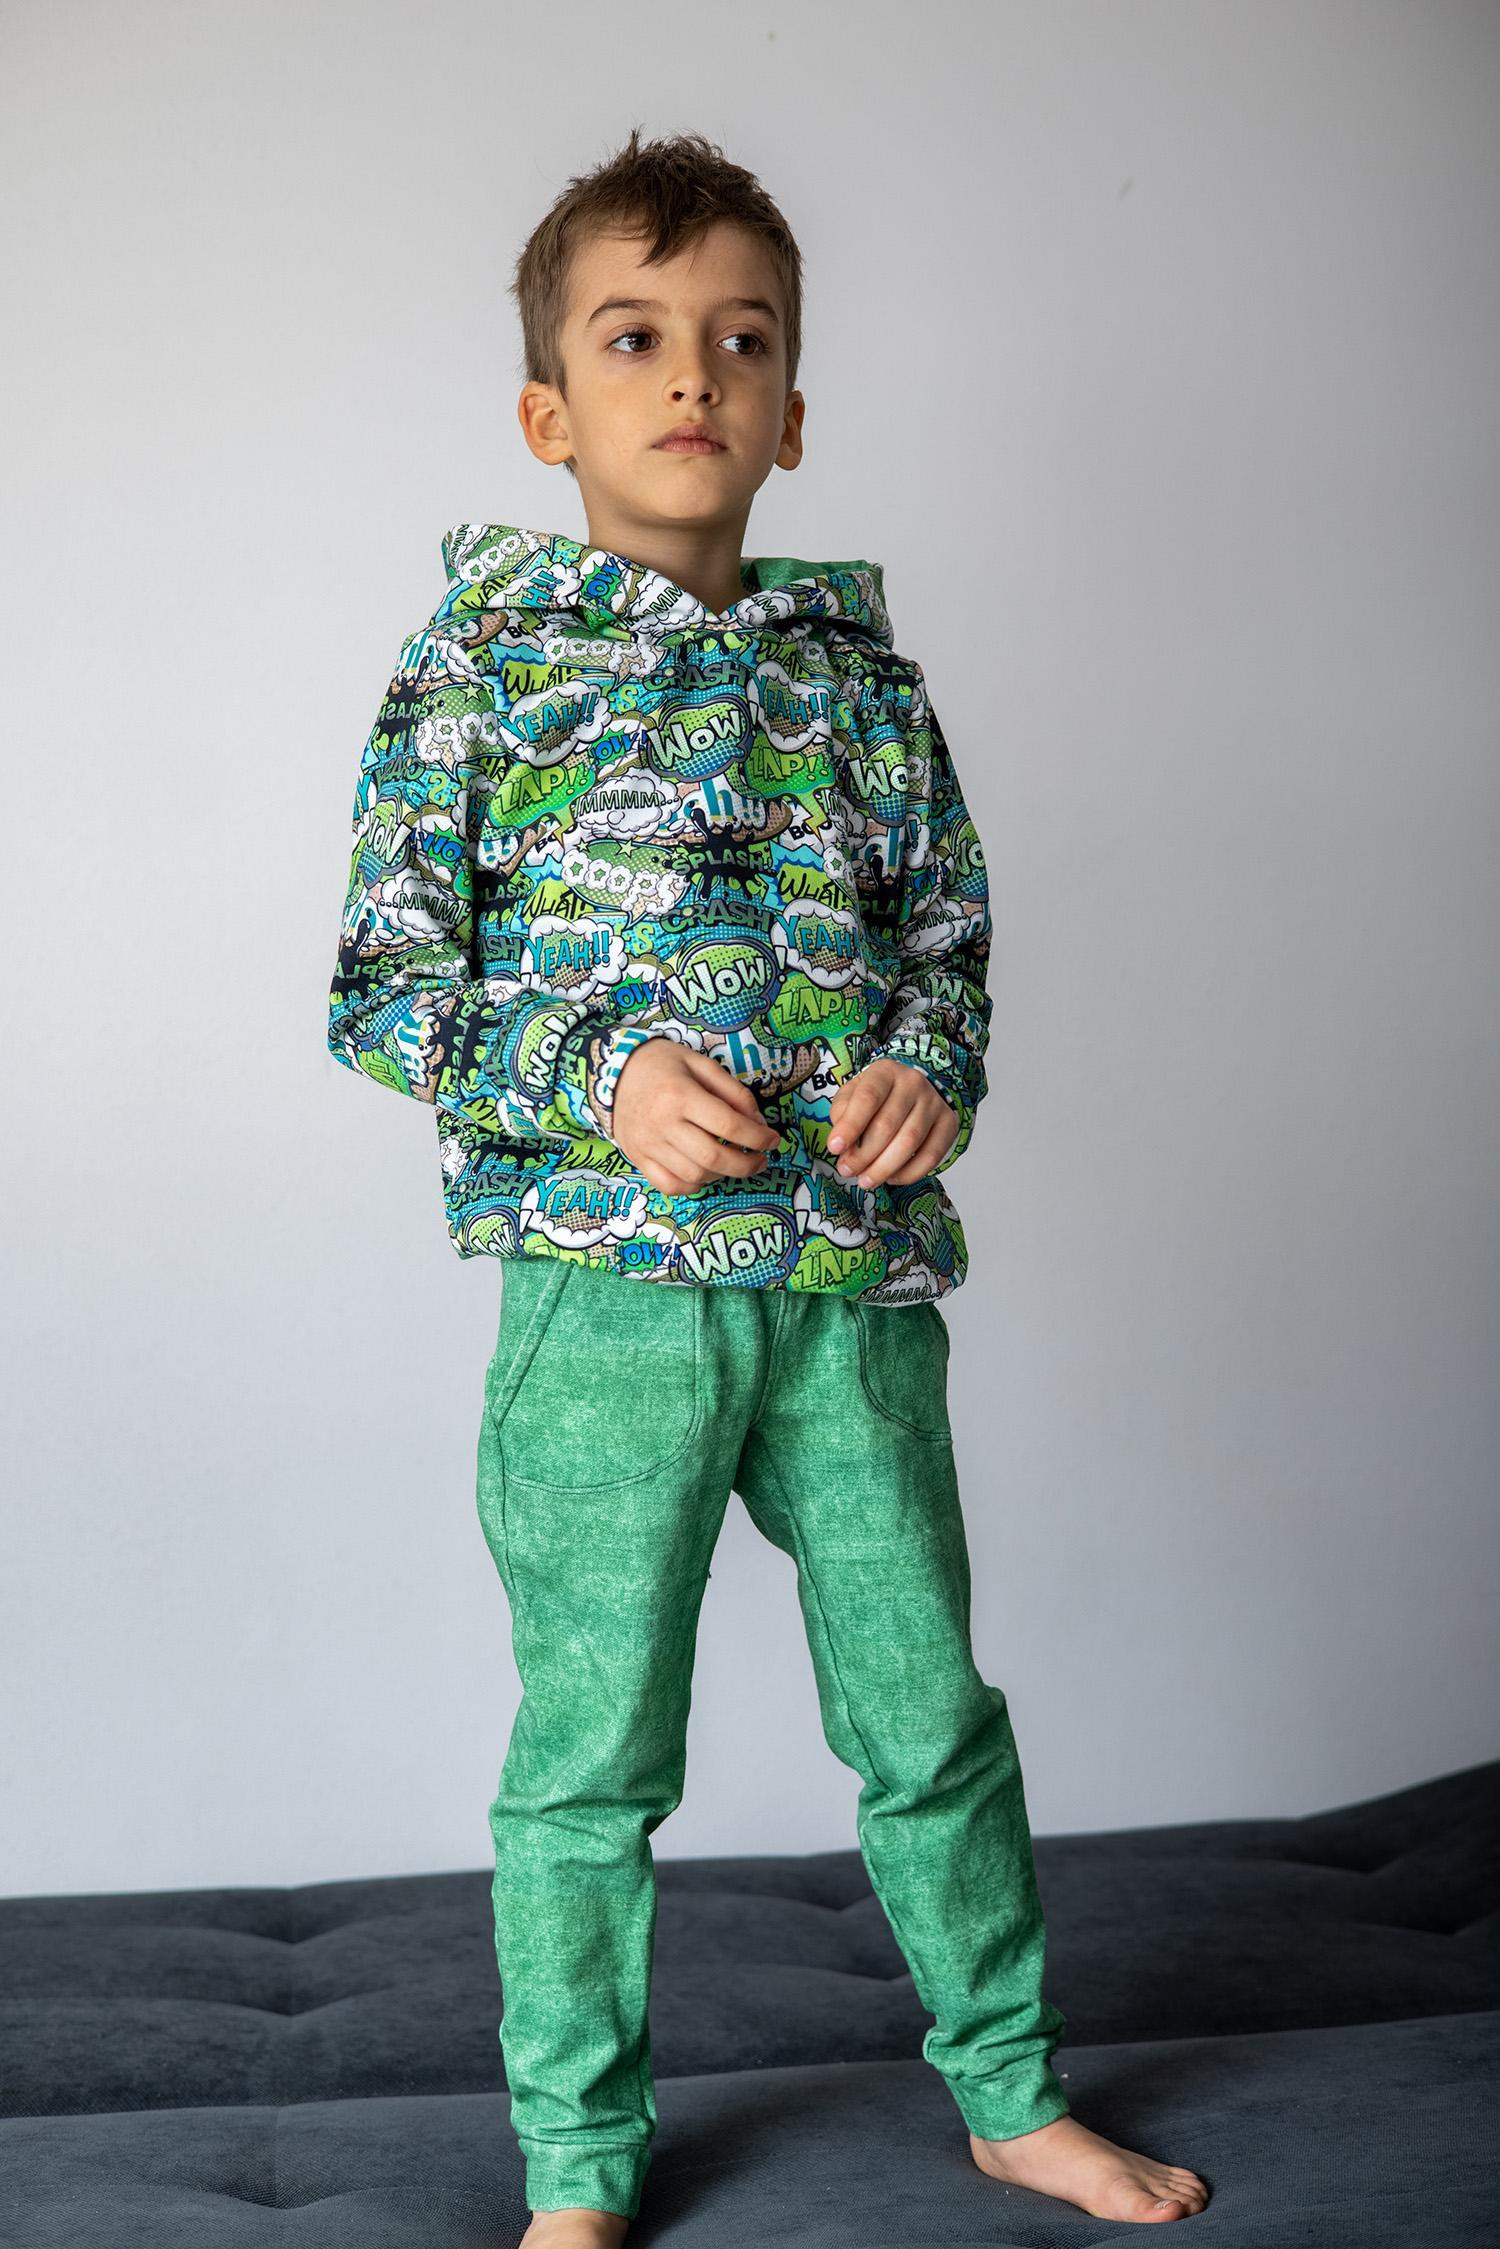 Children's tracksuit (OSLO) - CATS / meow (CATS WORLD ) / ACID WASH GREY - looped knit fabric 